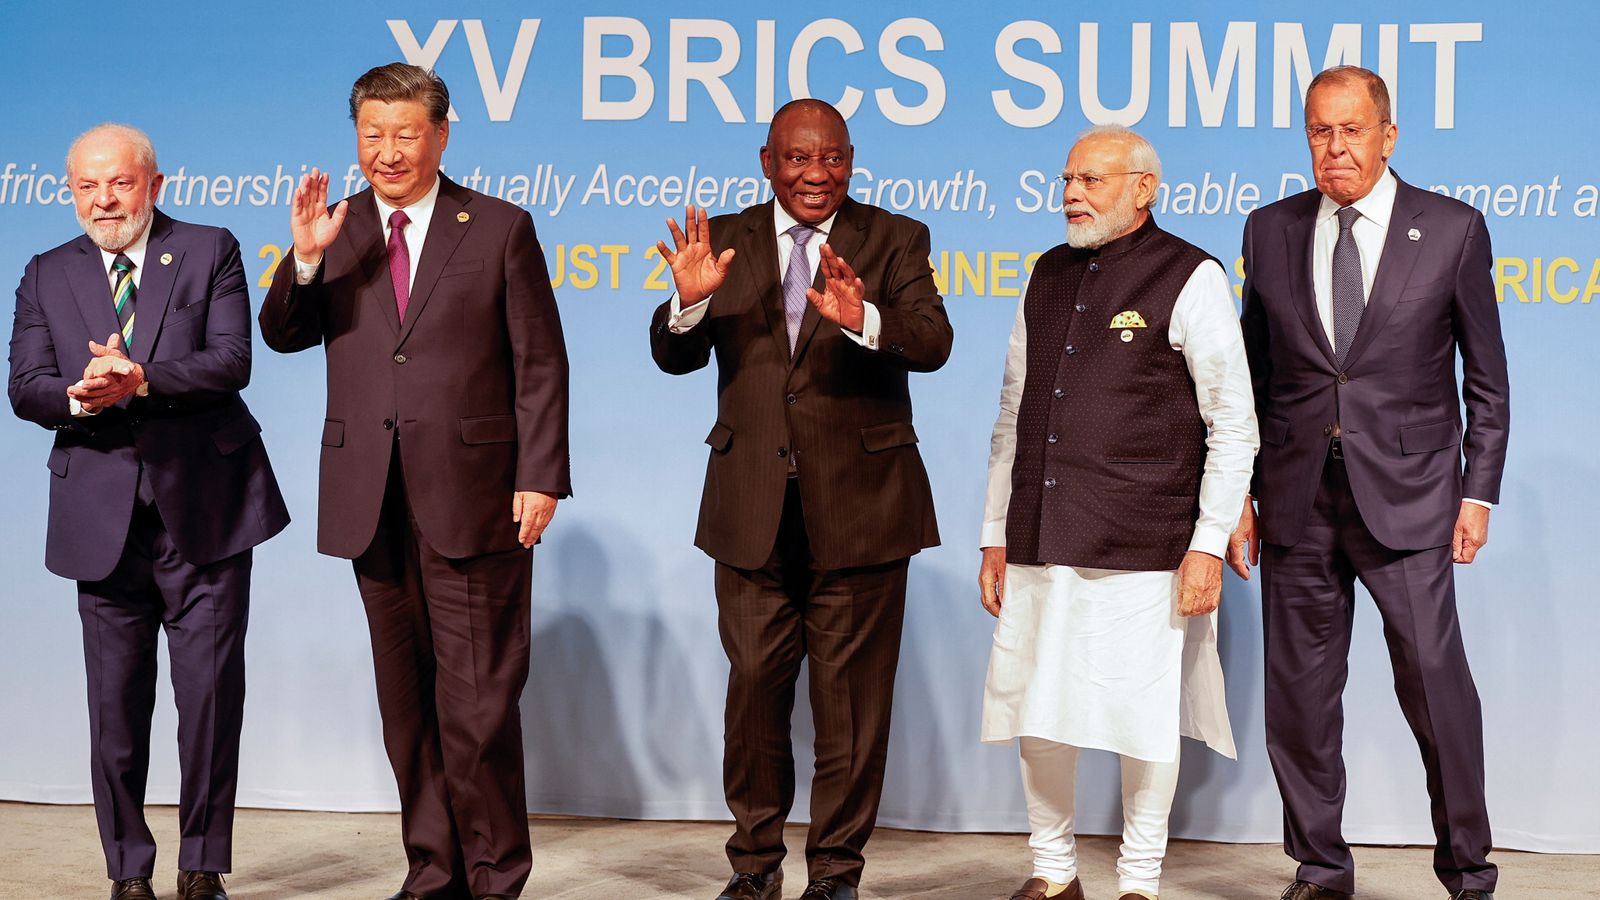 Iran and Saudi Arabia among six new countries invited to join BRICS bloc to rival G7